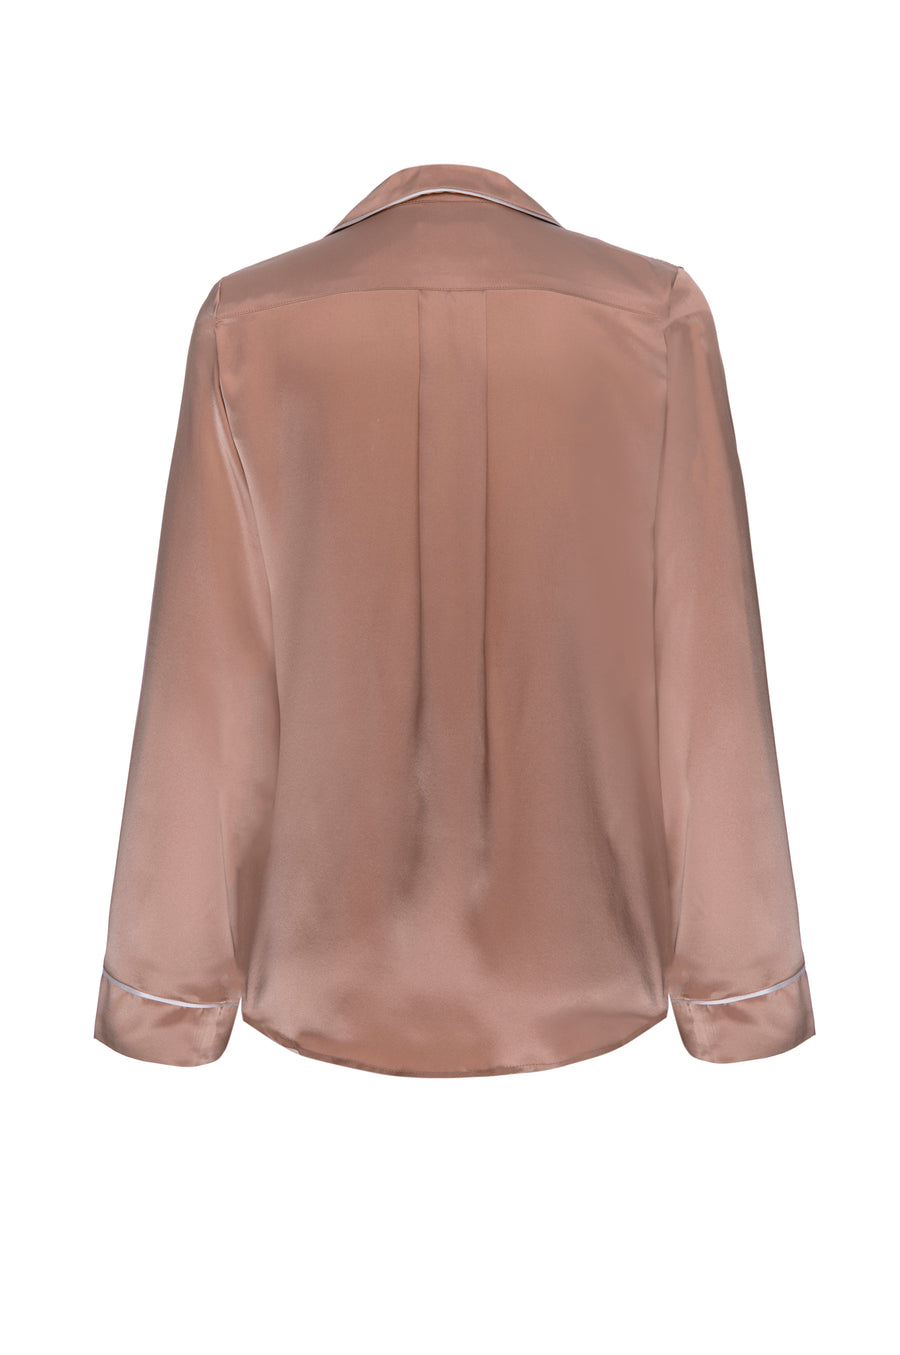 Silk Charmeuse Long Sleeved Top: Apricot